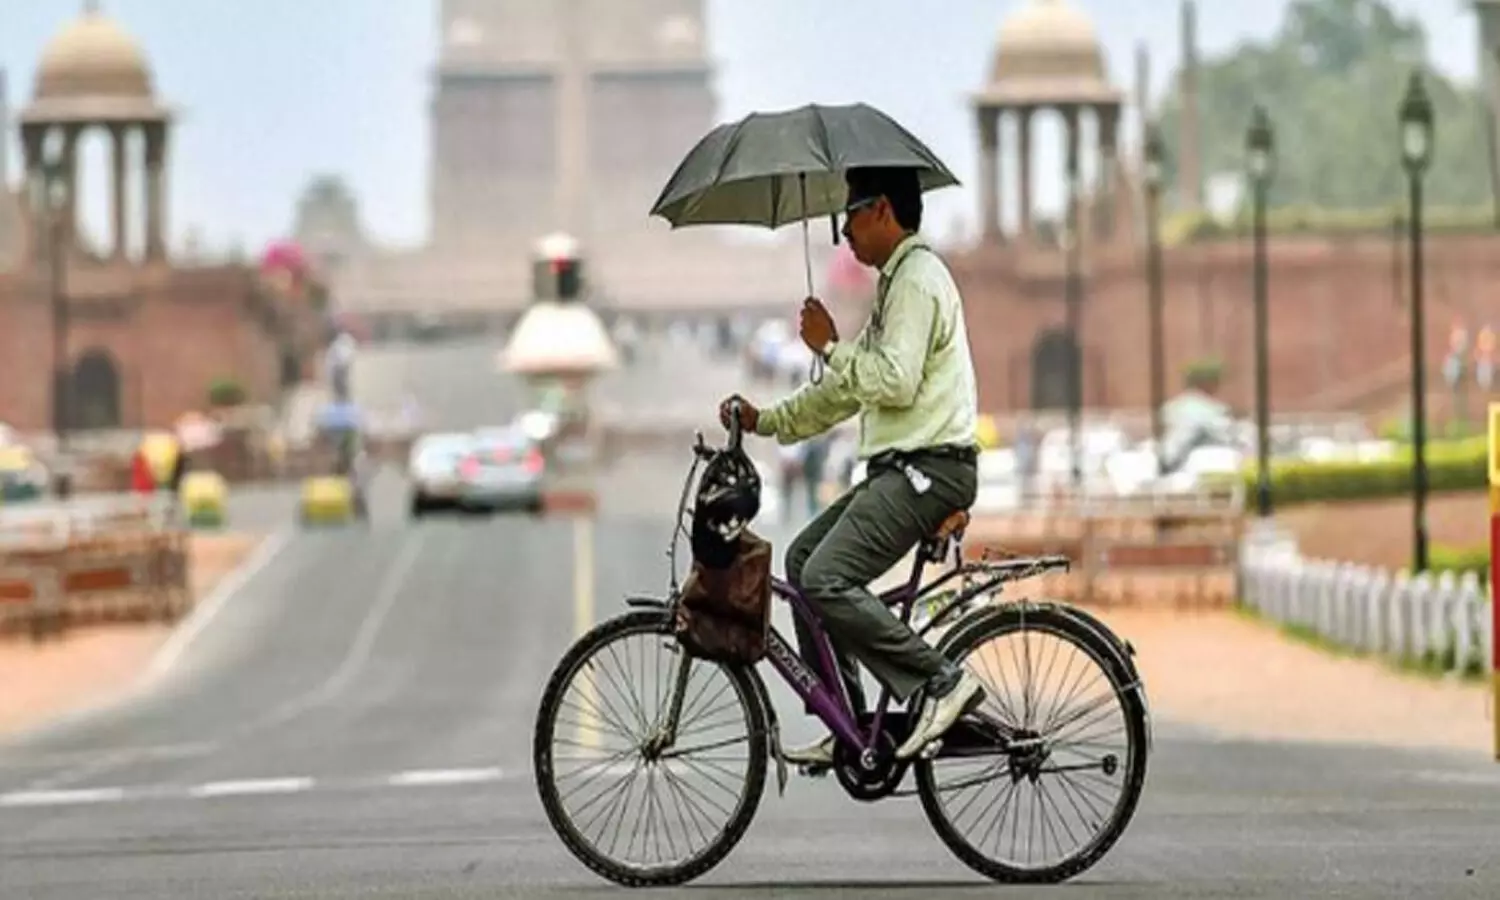 Delhi Weather: Heat wave like situation in National Capital, Temperature above 40